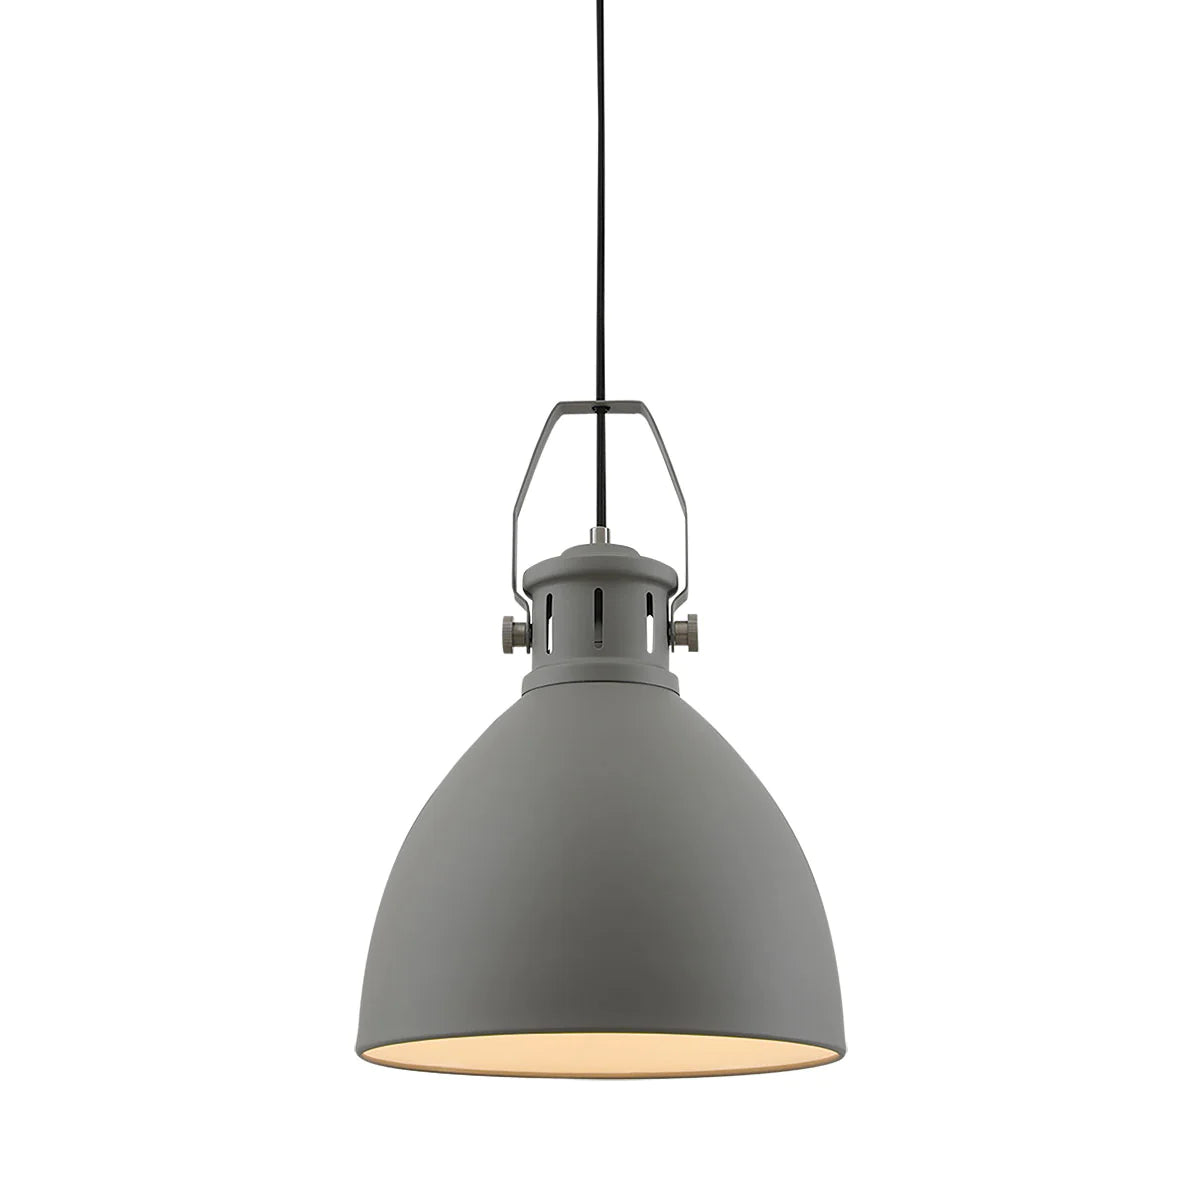 Fabrica Large Pendent